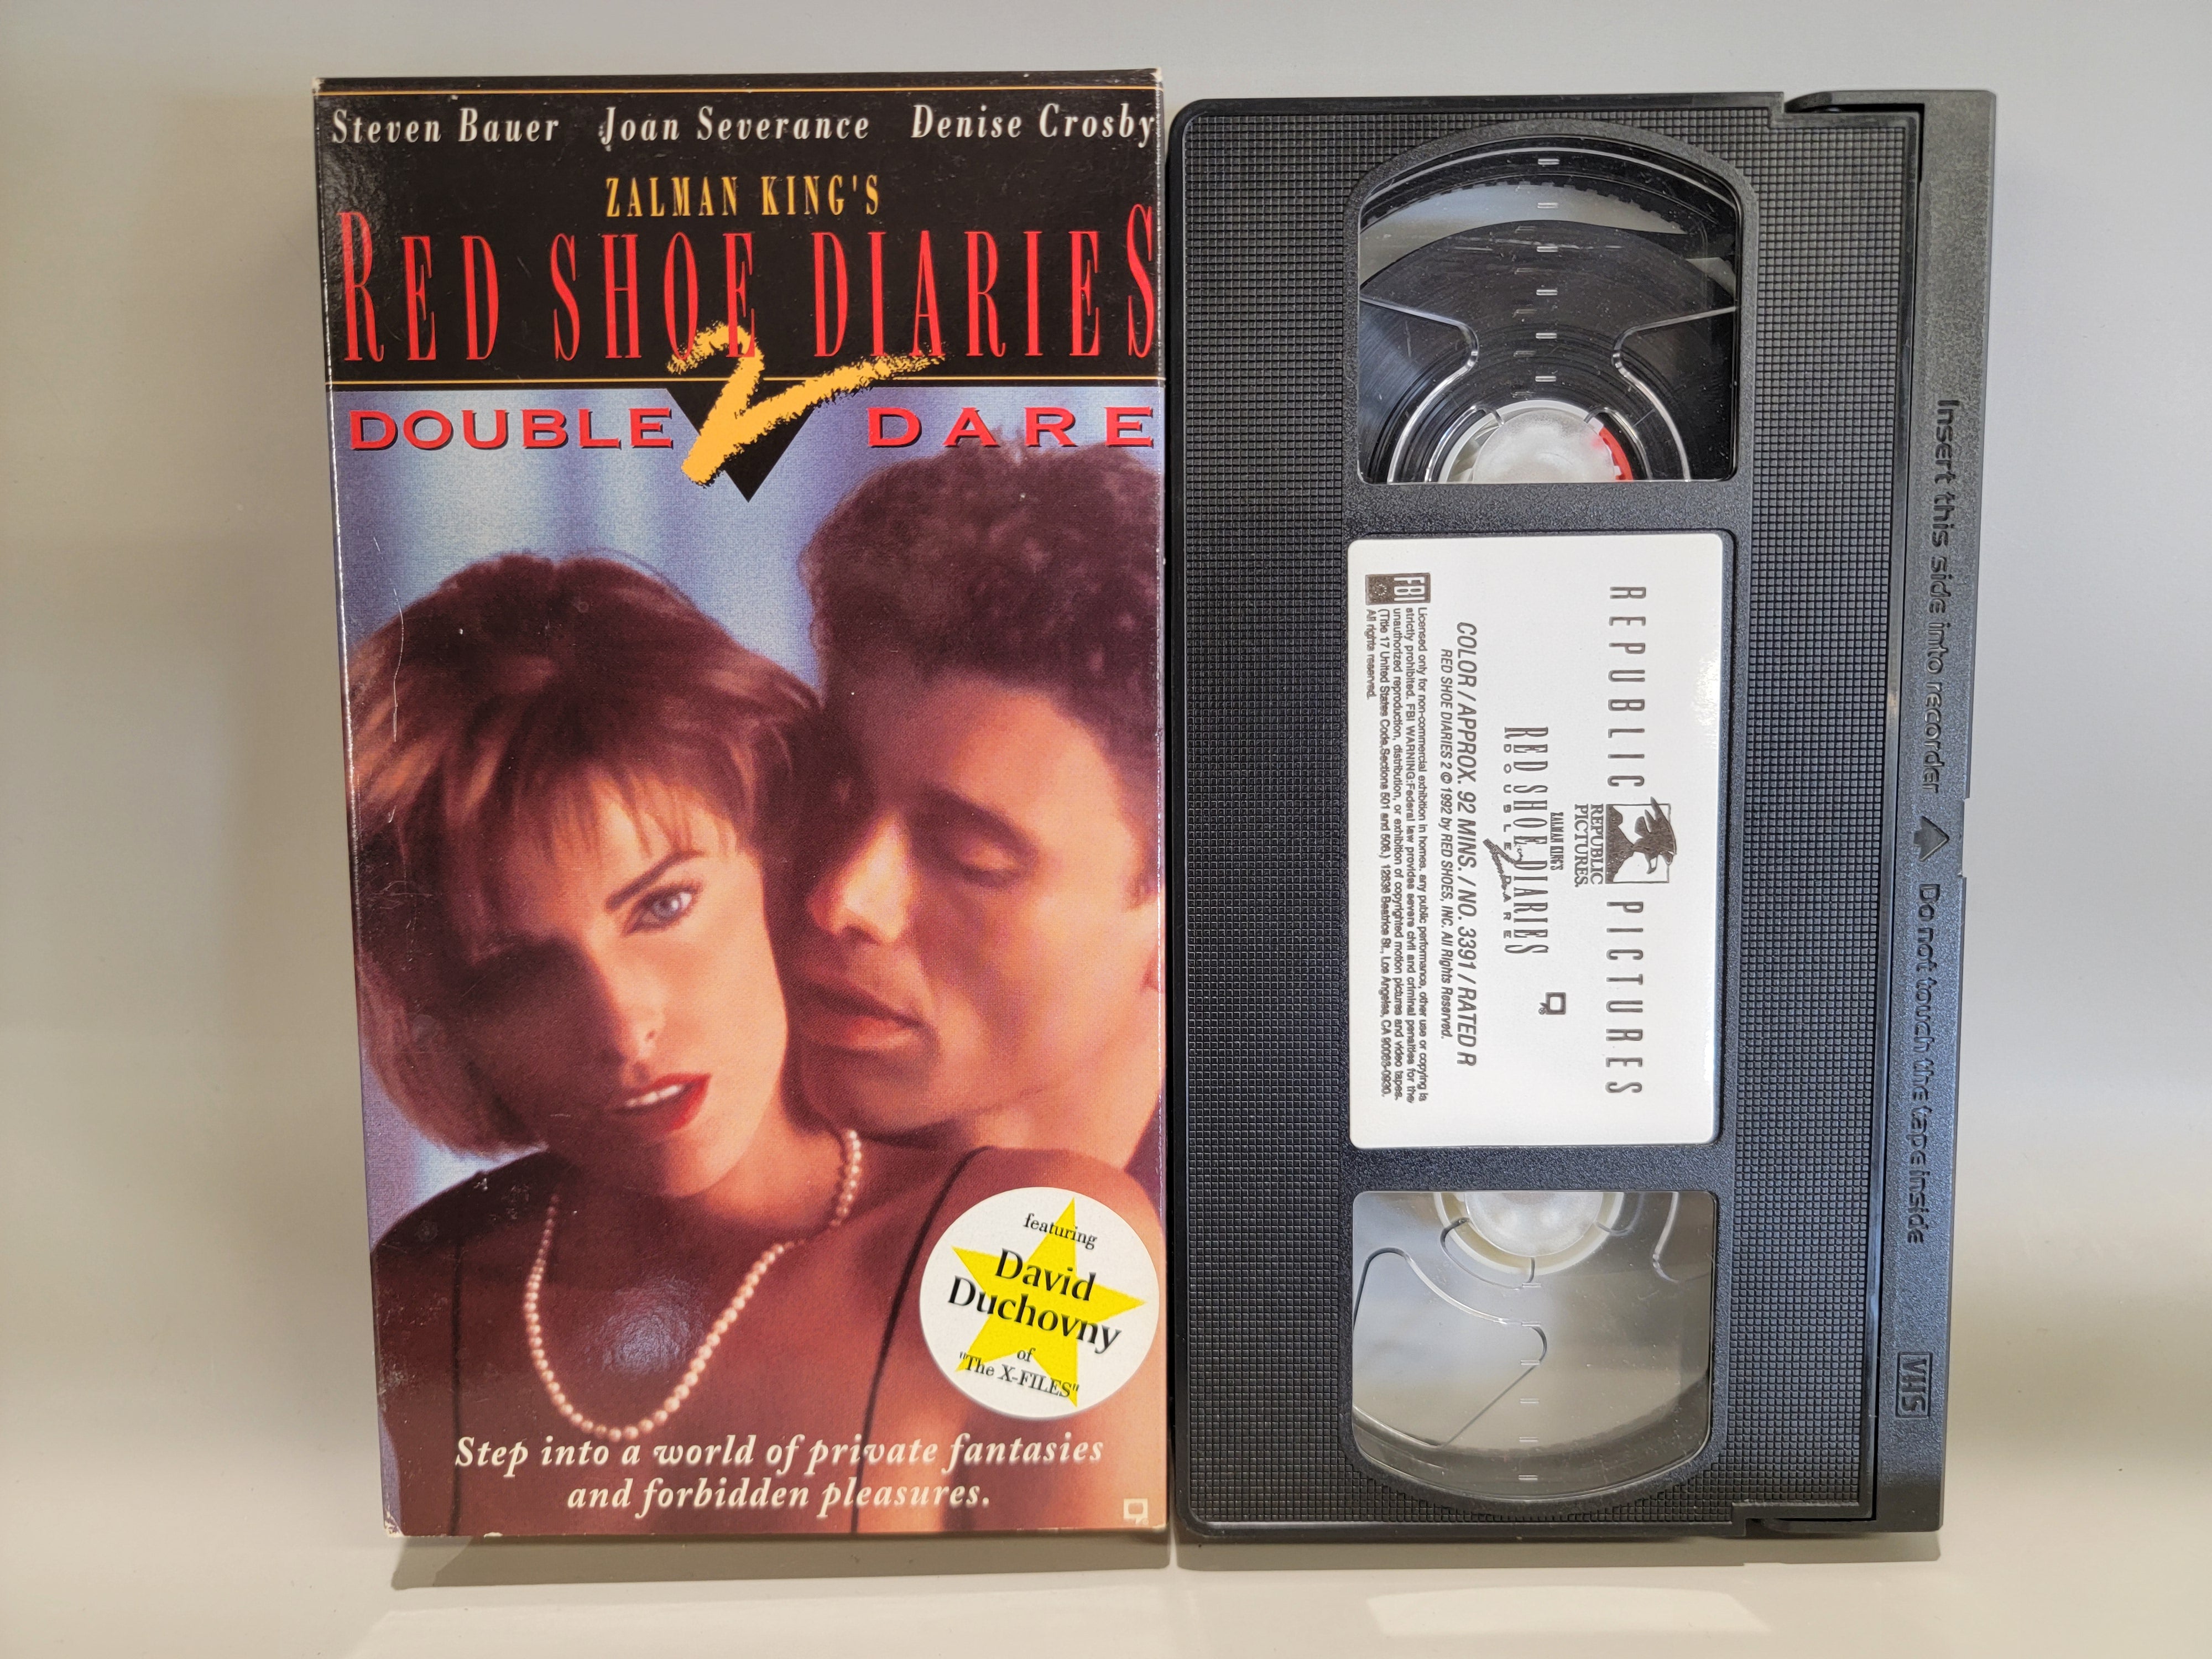 RED SHOE DIARIES 2: DOUBLE DARE VHS [USED]